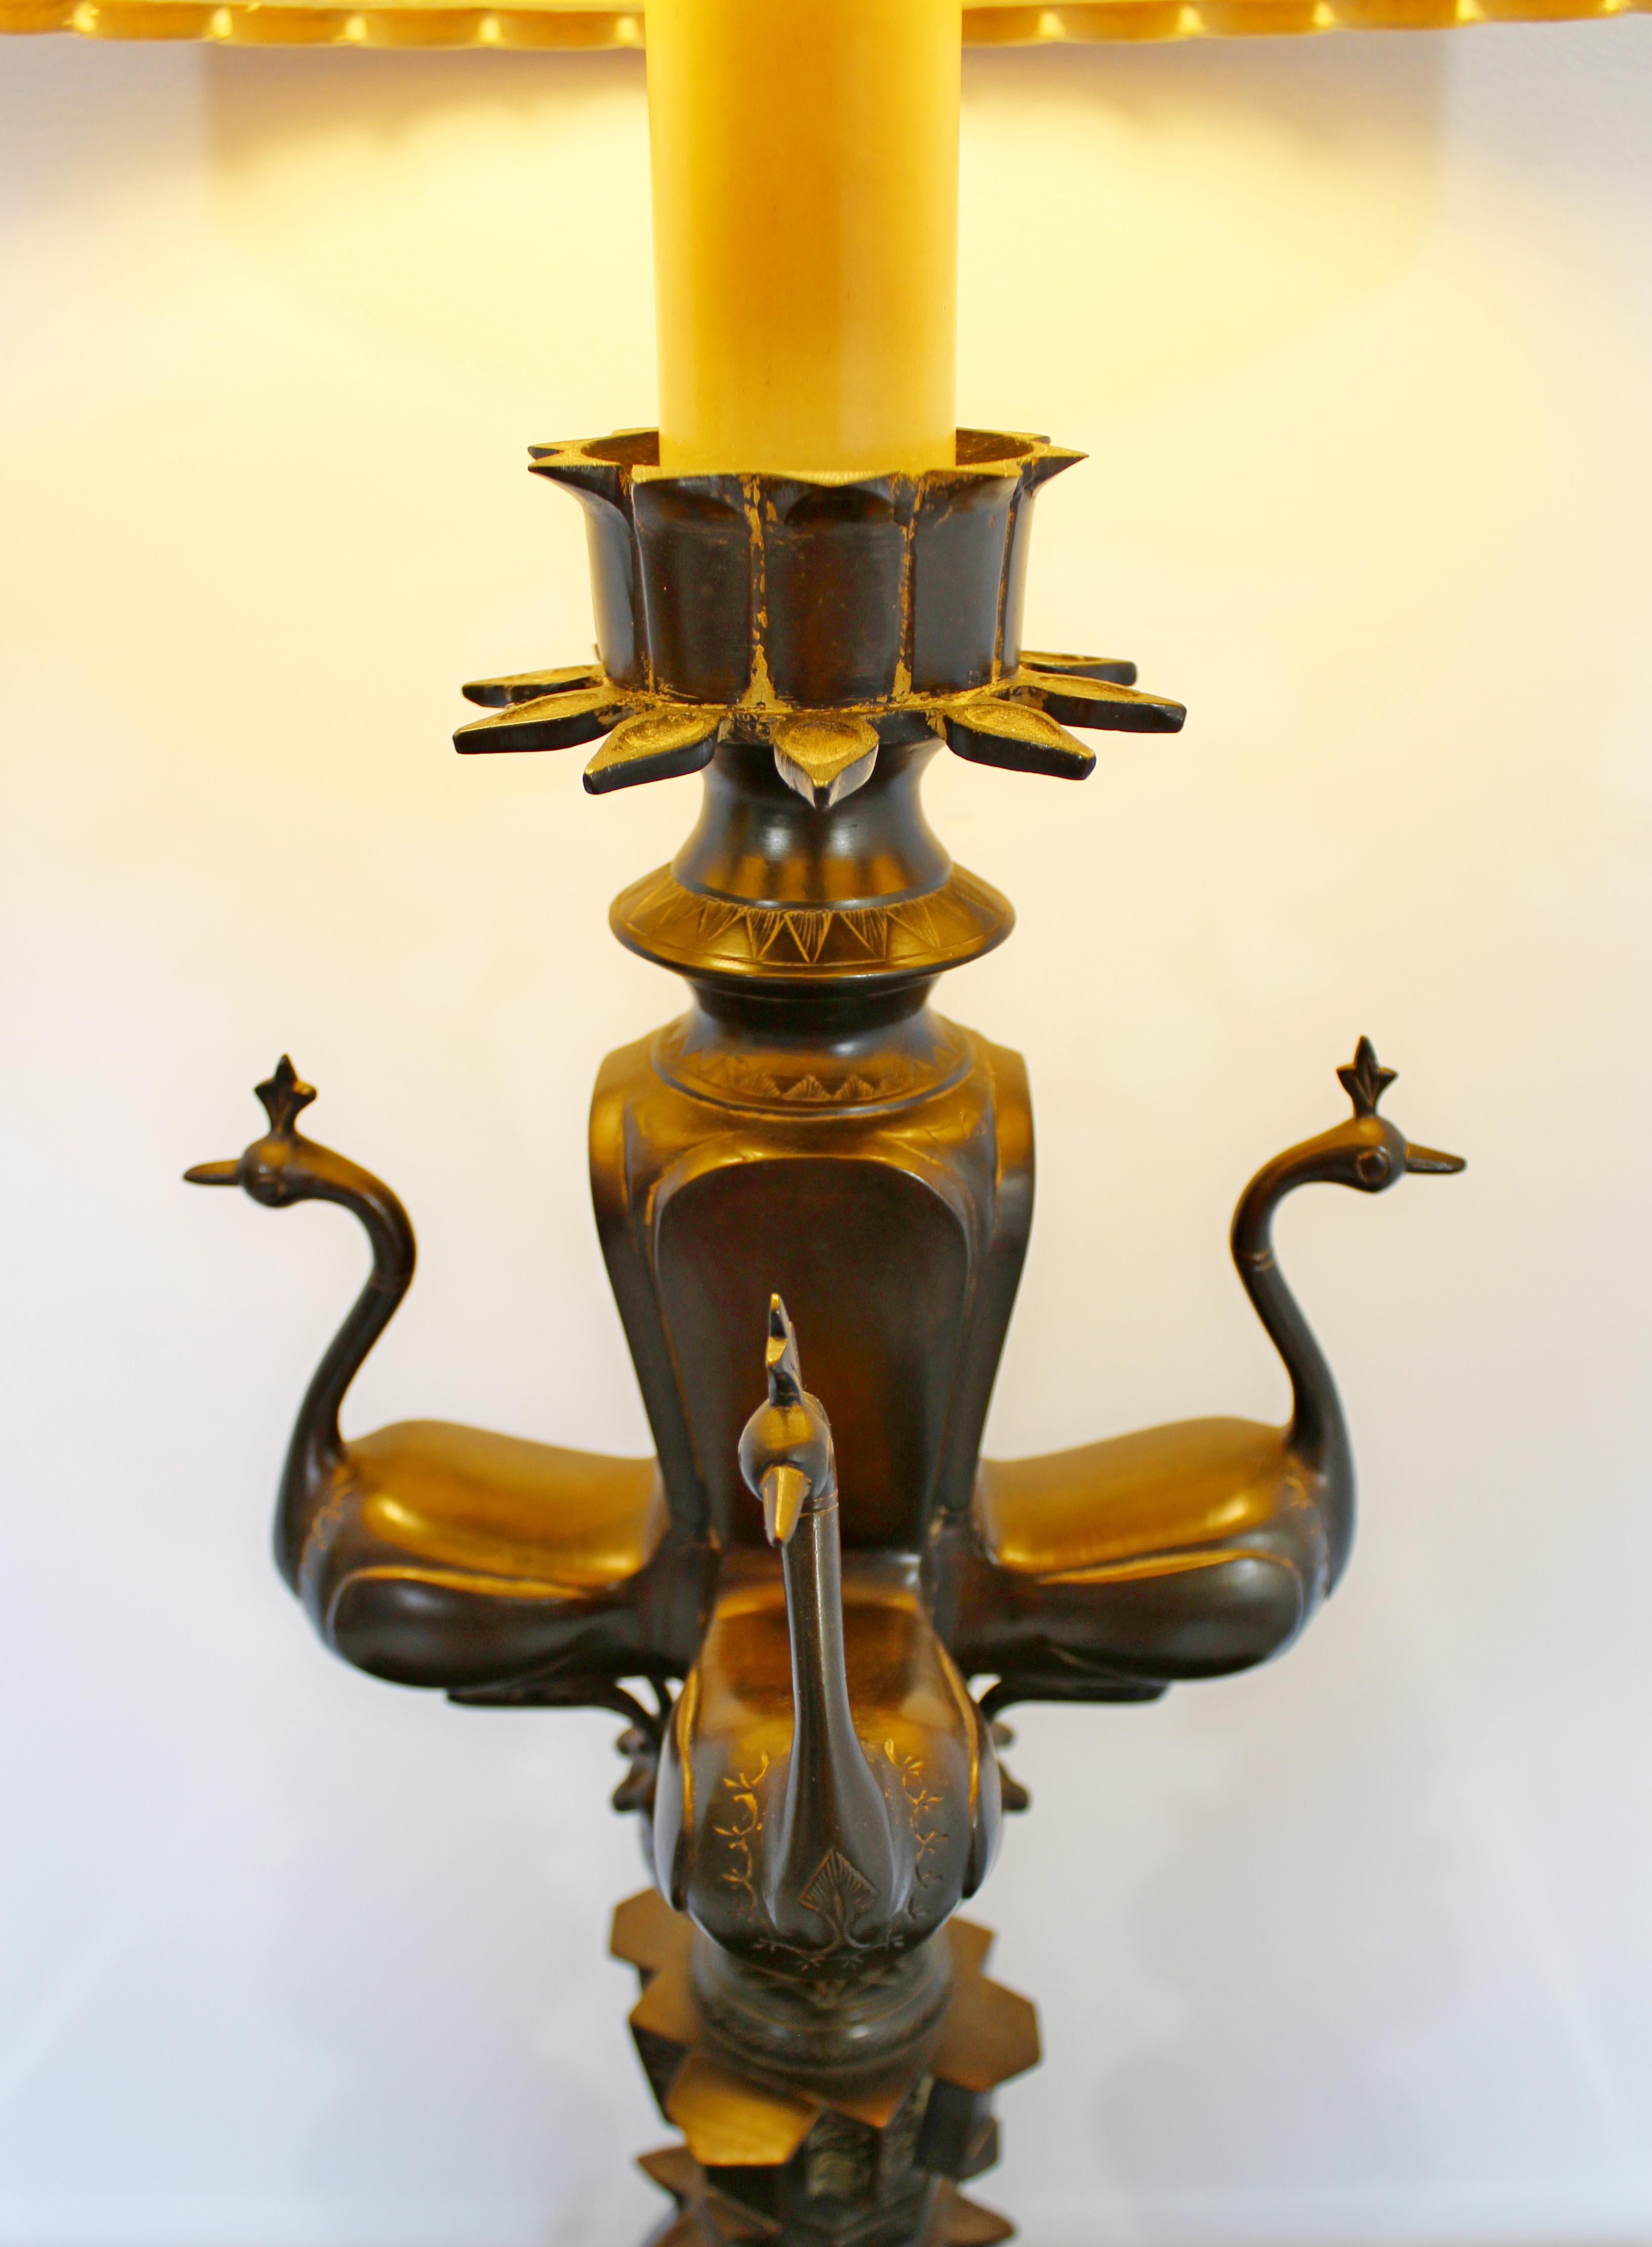 For your consideration is an outstanding, bronze table lamp, with a peacock motif, original shade and finial, from Marbro, circa 1950s. In excellent vintage condition. The dimensions of the lamp are 10